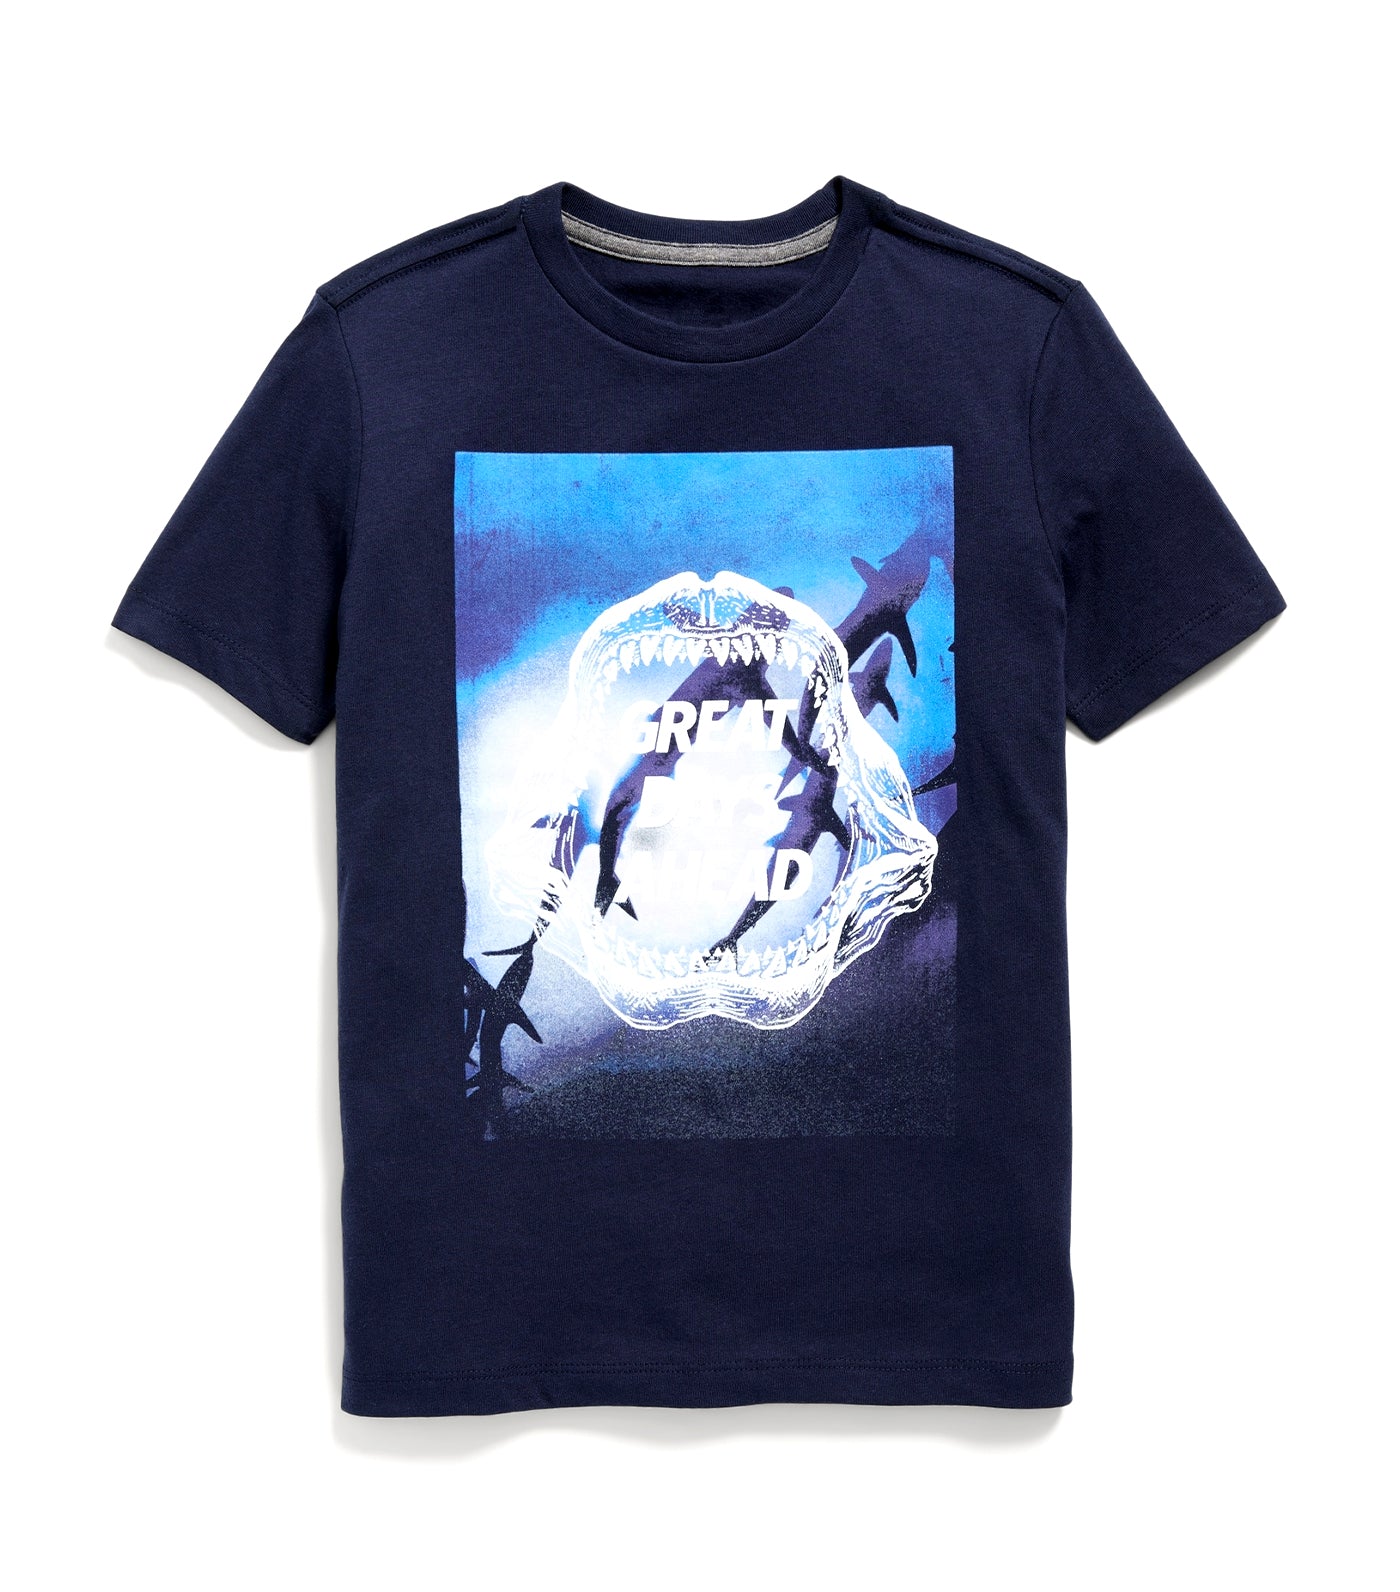 Graphic Crew-Neck T-Shirt for Boys - Navy